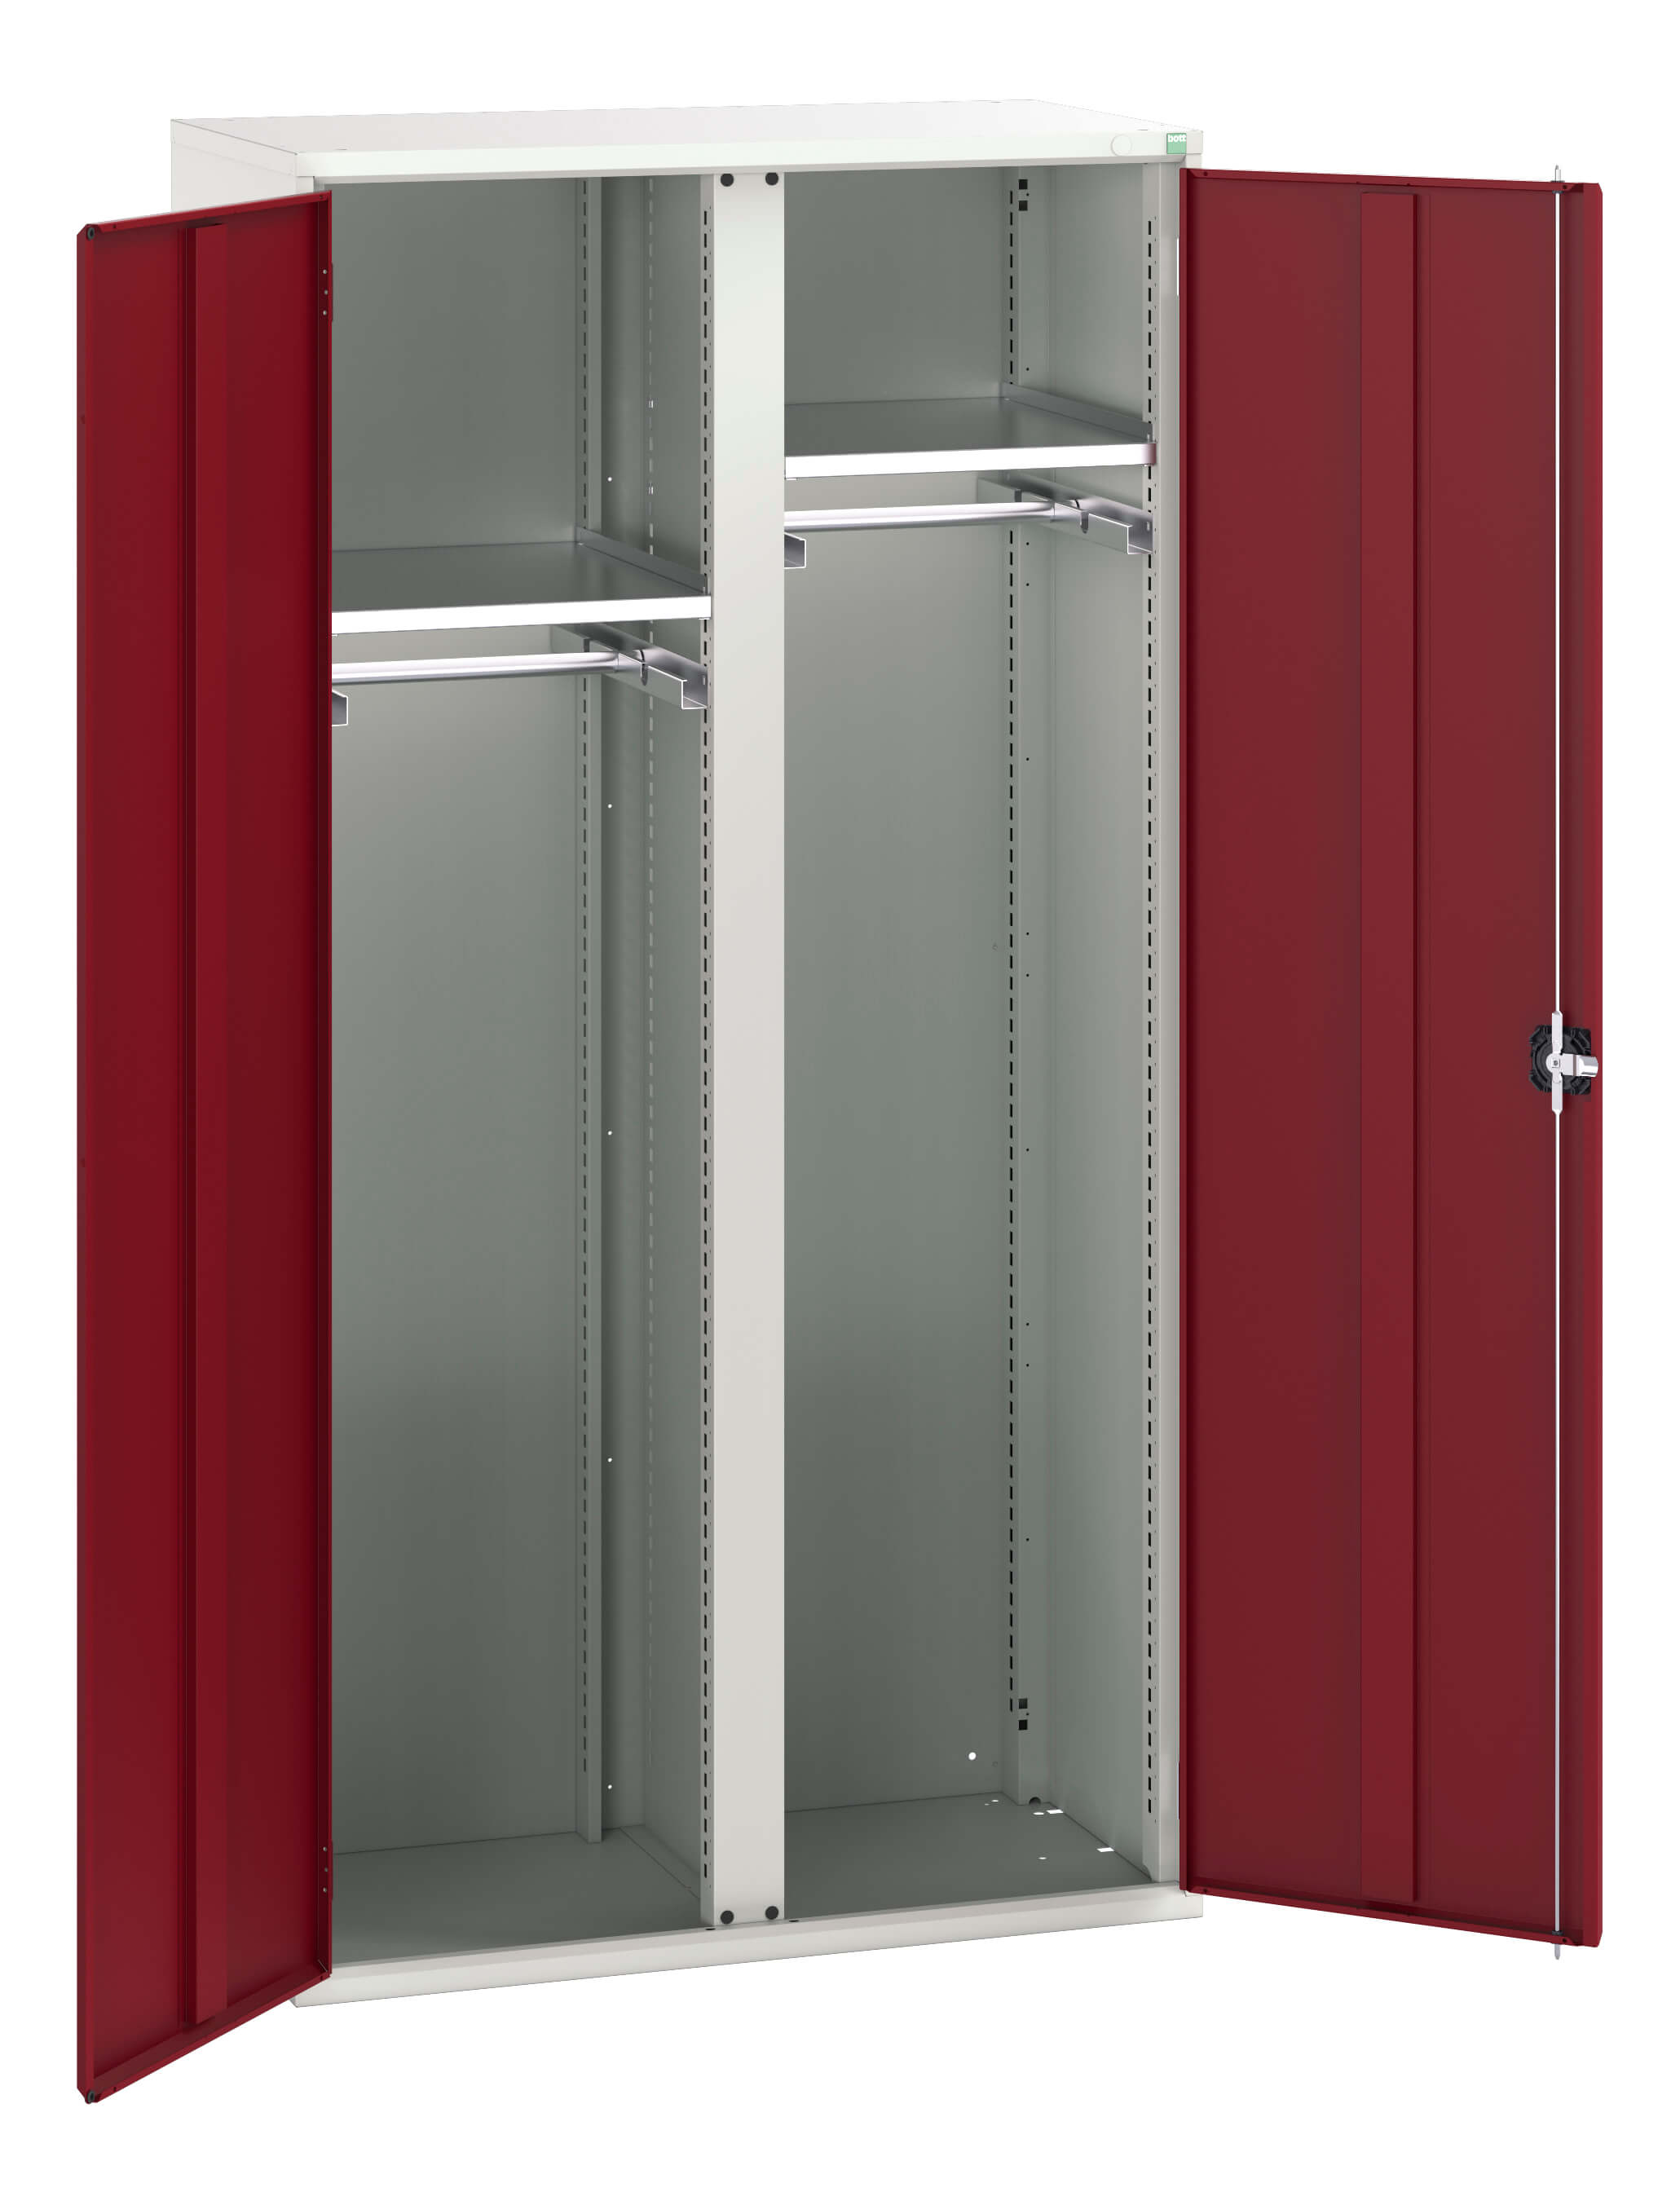 Bott Verso Ppe / Janitorial Kitted Cupboard With Vertical Partition - 16926578.24